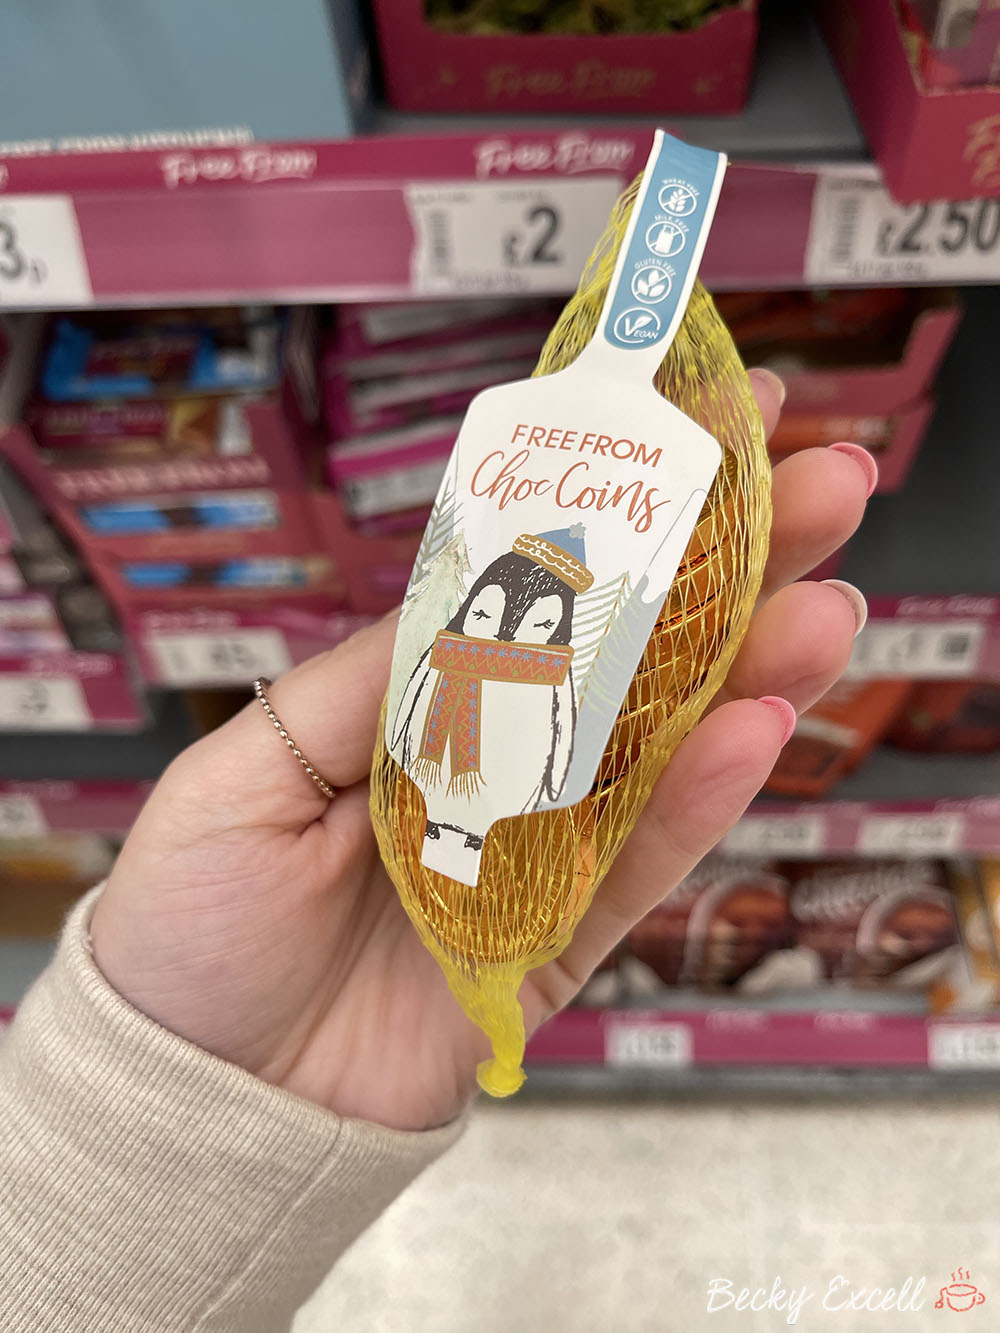 Asda's gluten-free Christmas products 2021: Free From Choc Coins